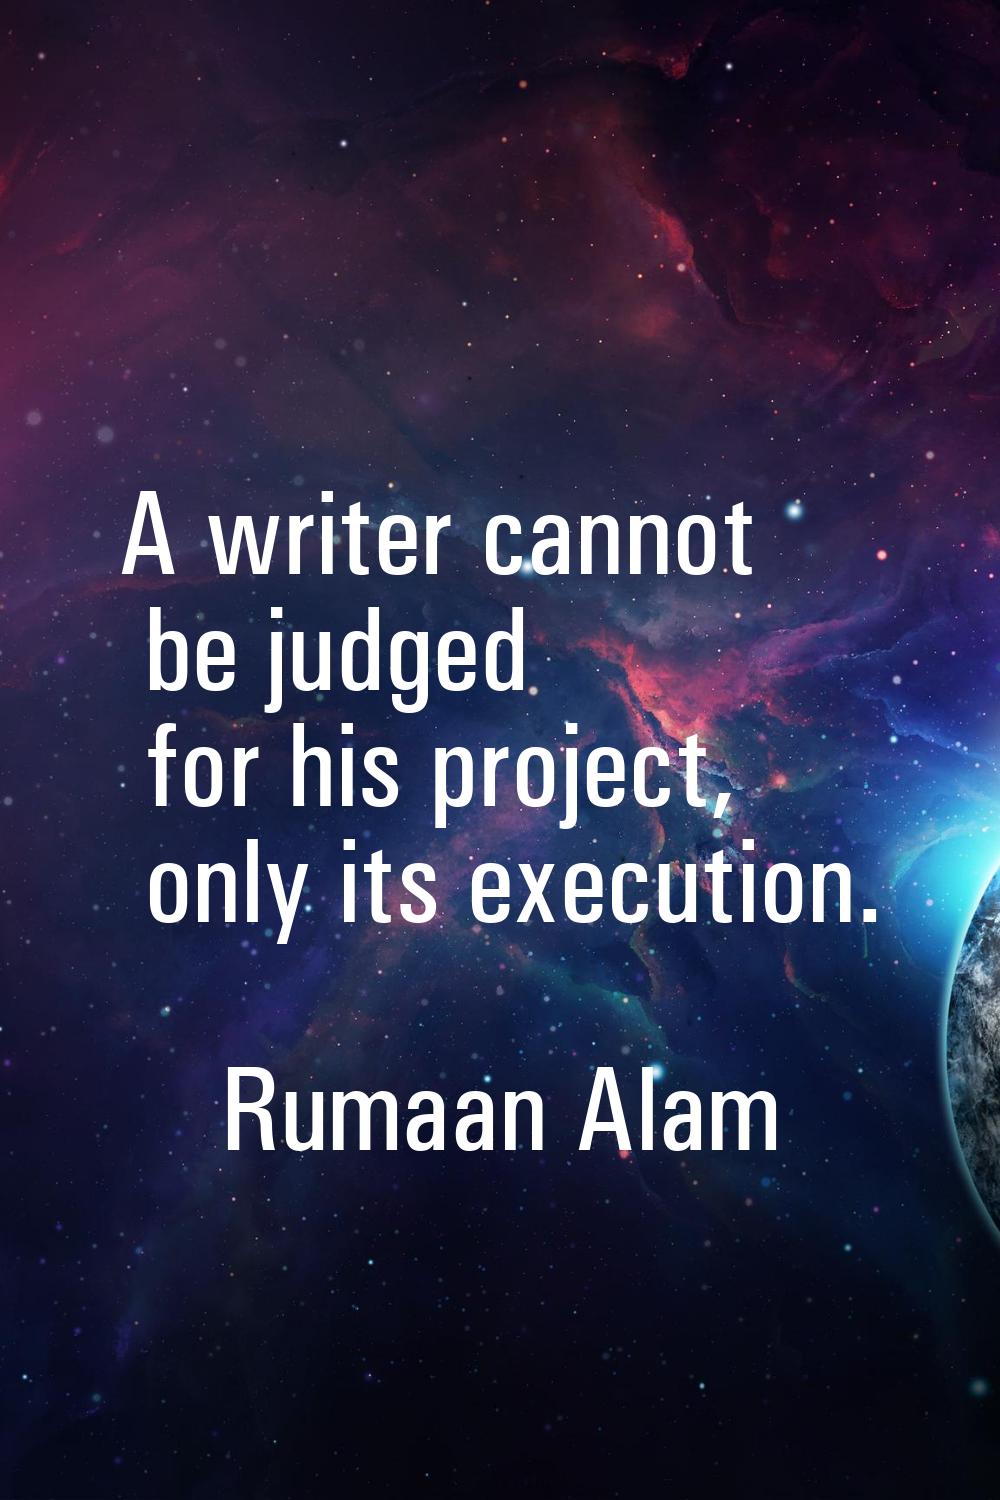 A writer cannot be judged for his project, only its execution.